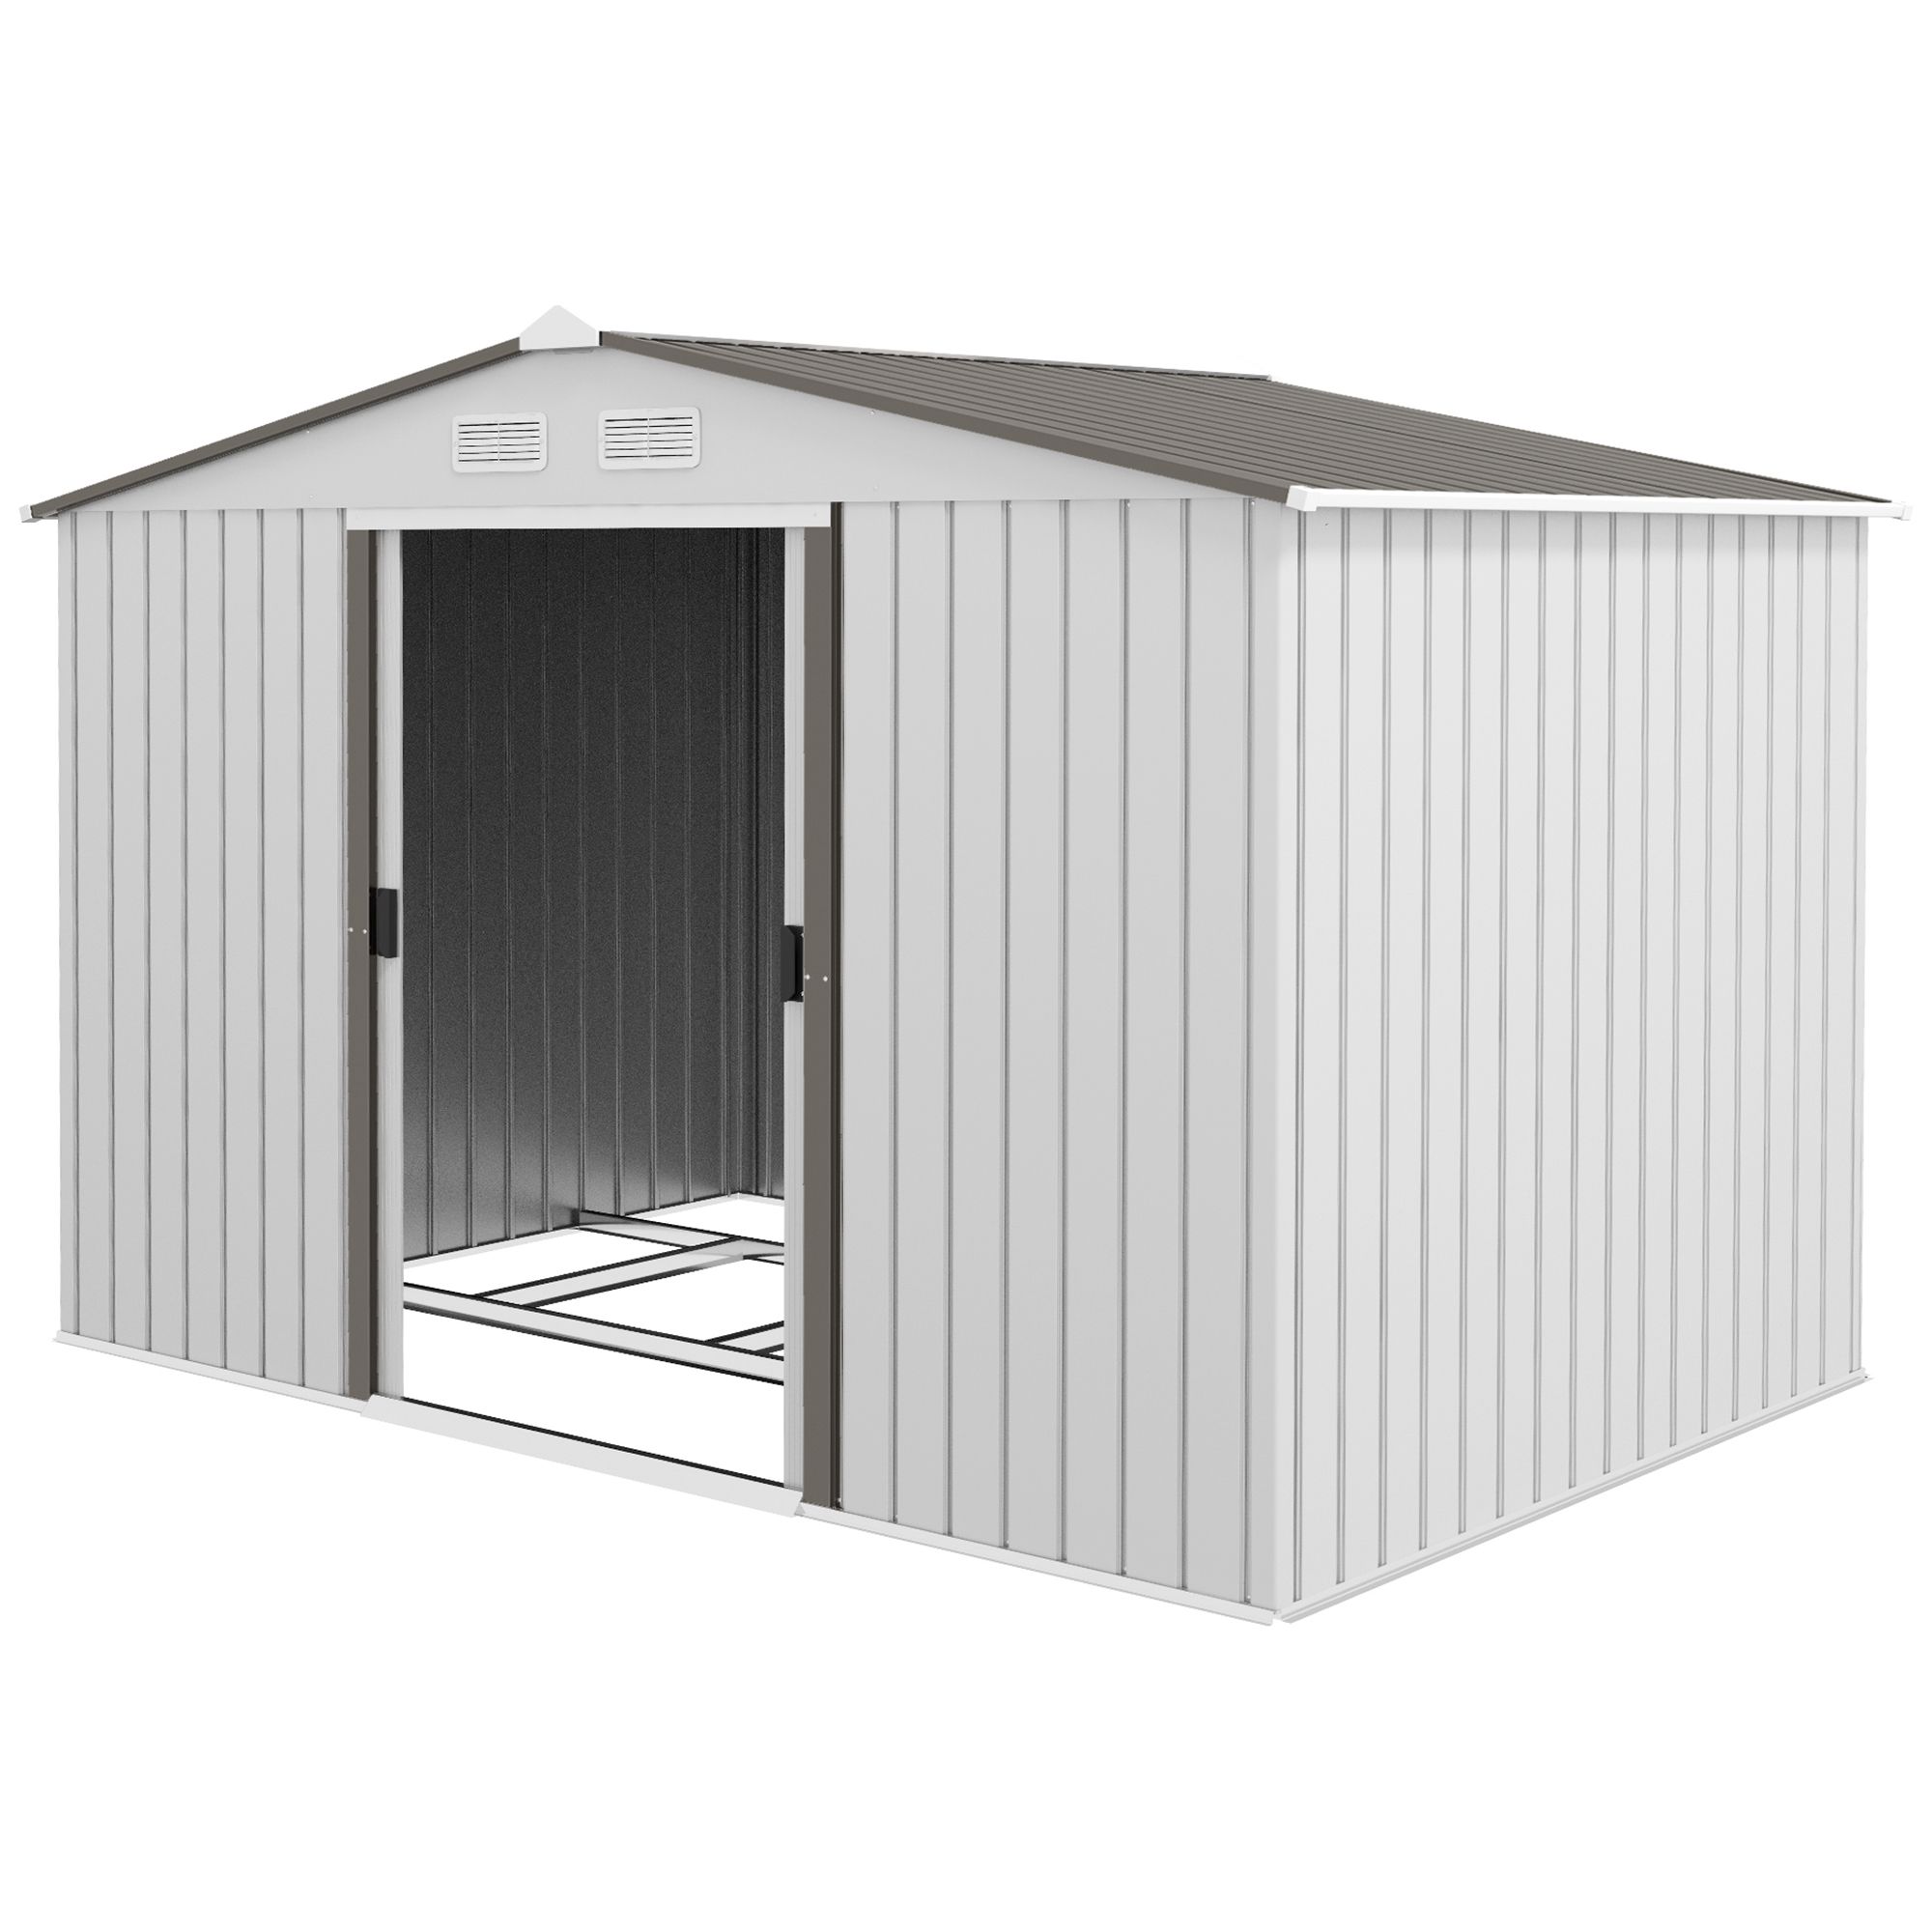 Outsunny 9 X 6ft Garden Storage Shed, Metal Outdoor Storage Shed House With Floor Foundation, Ventilation & Doors, Grey